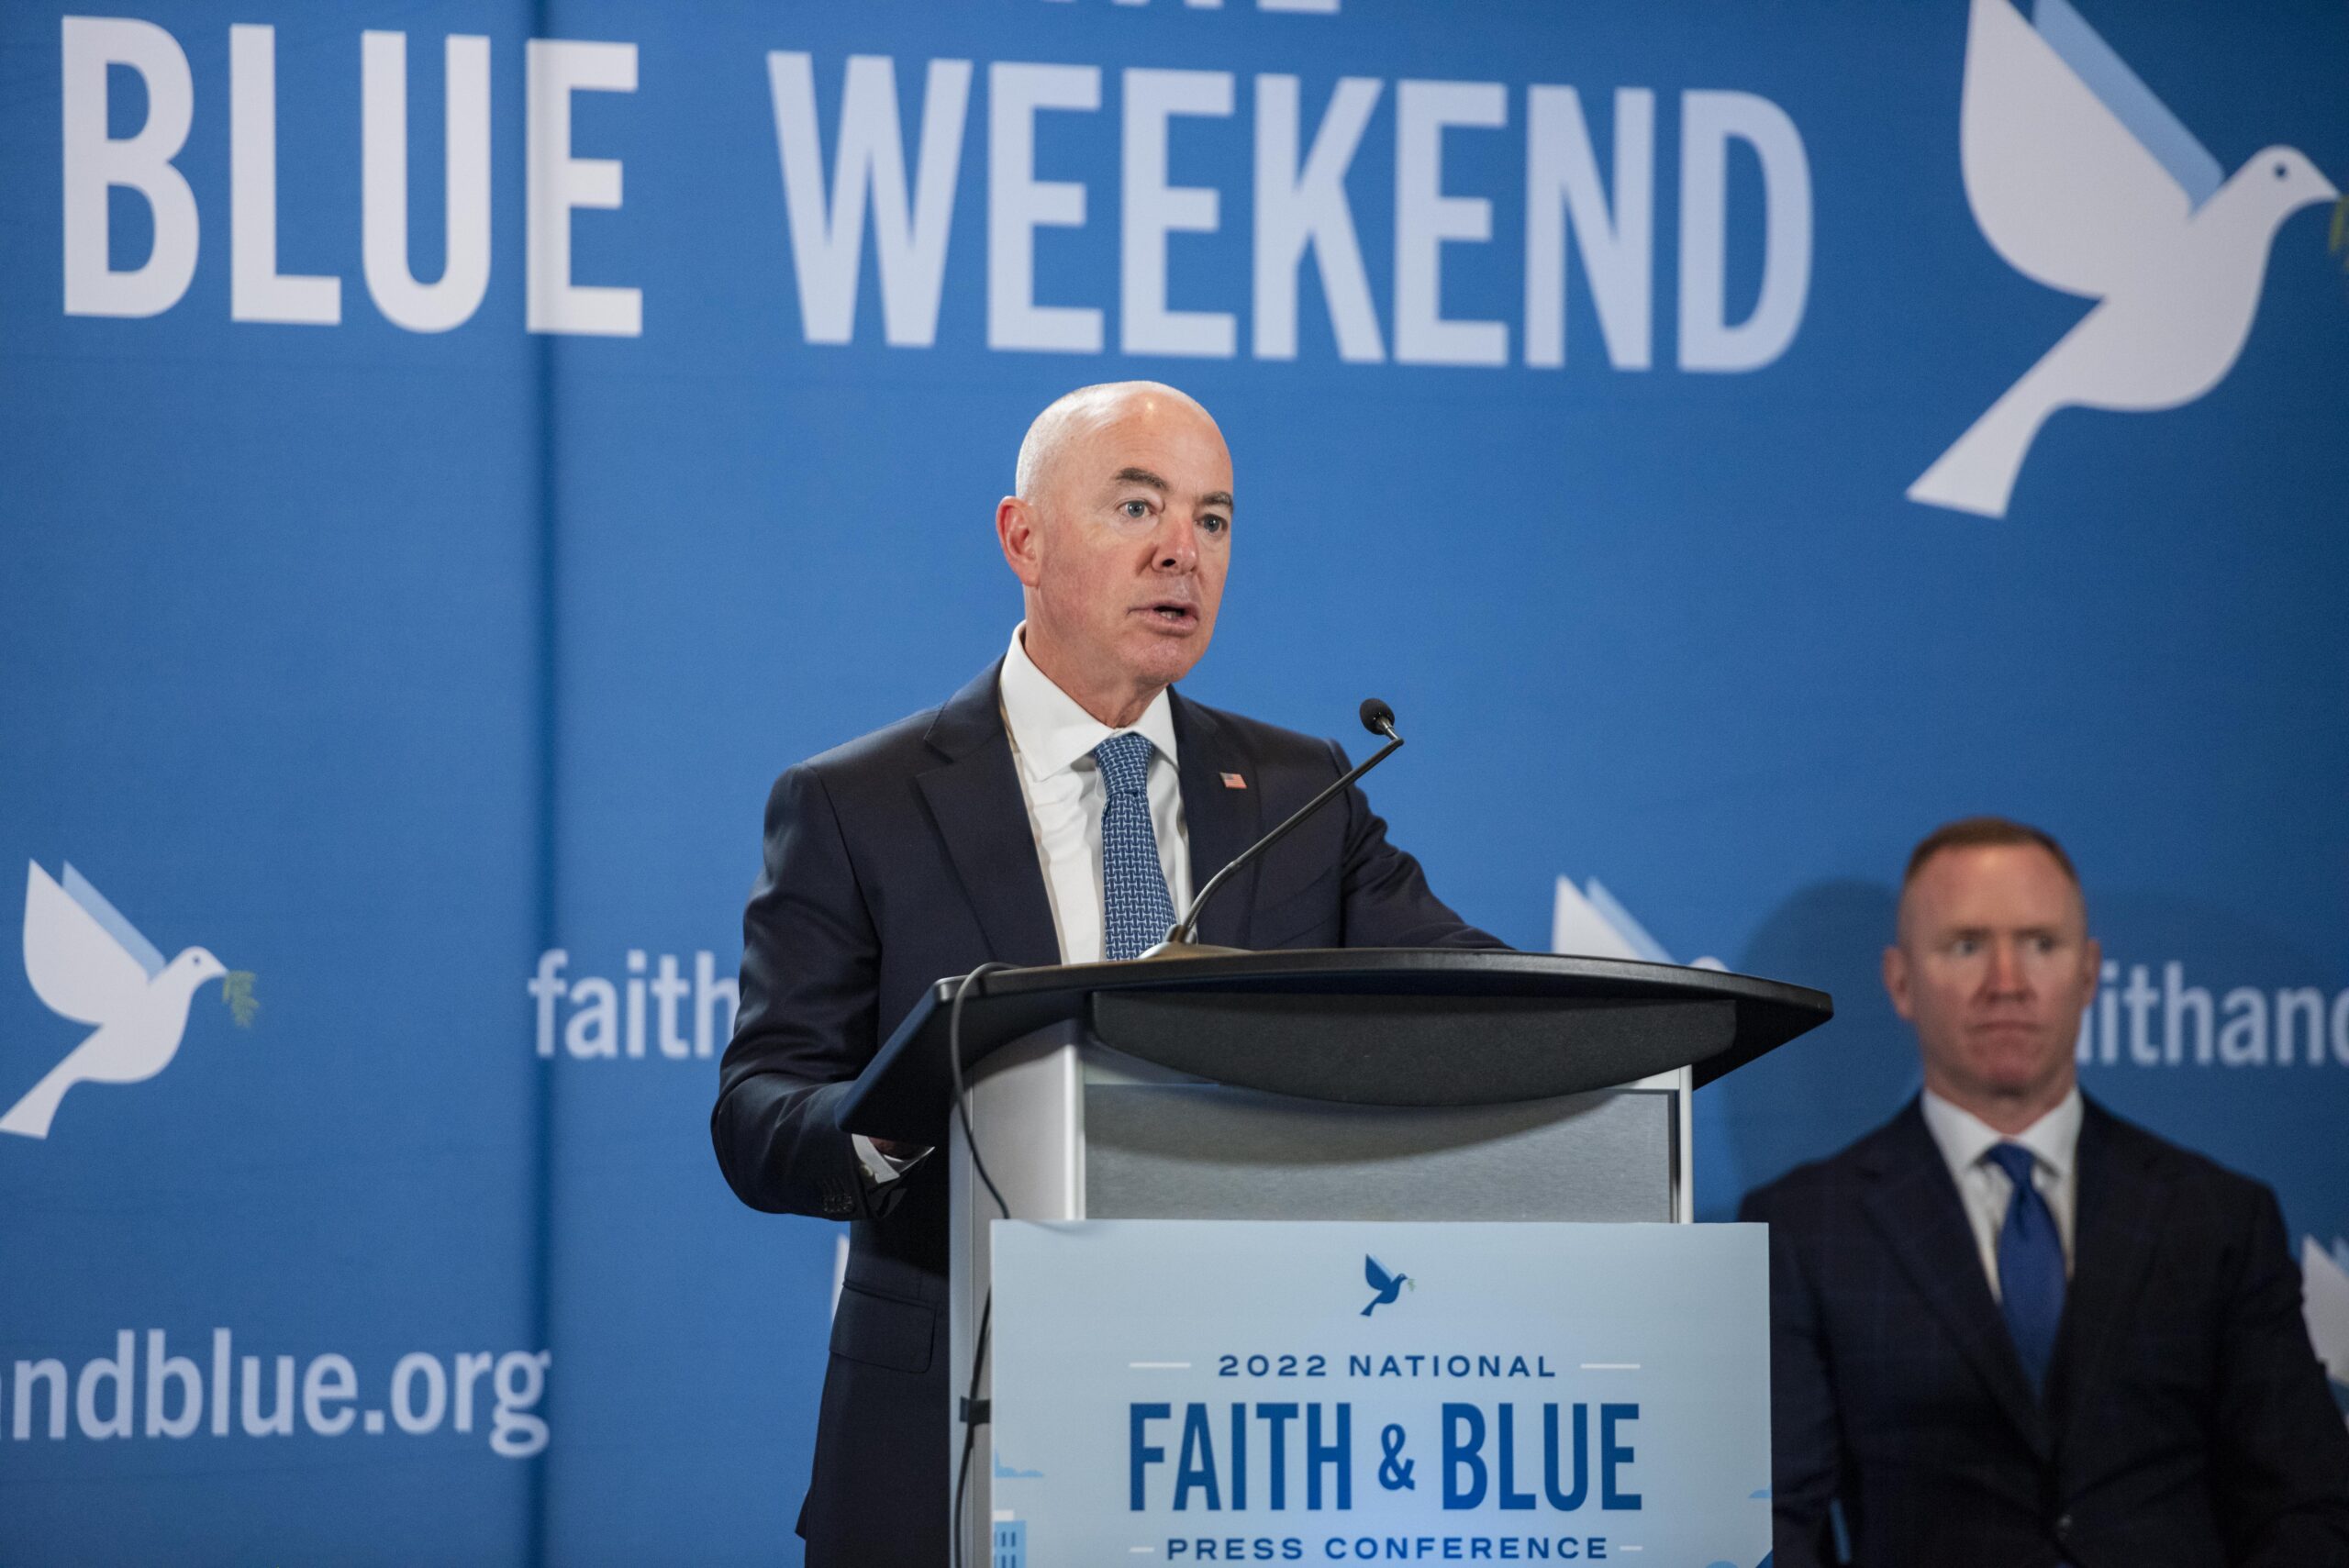 Secretary Alejandro Mayorkas delivers remarks at the 2022 National Faith & Blue Weekend Press Conference in Washington D.C.